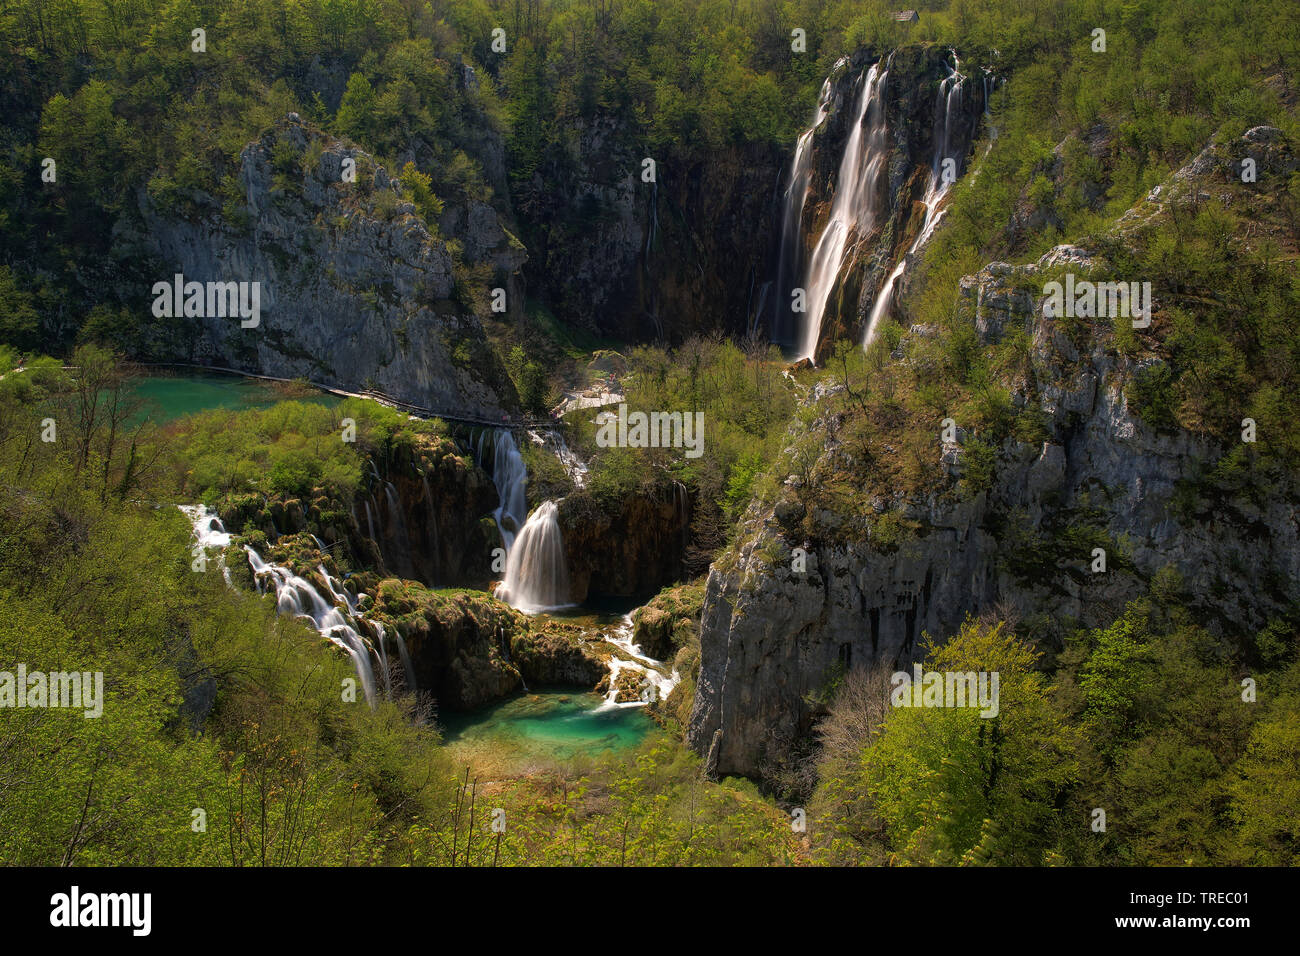 waterfalls at the Plitvice Lakes National Park, Croatia, Plitvice Lakes National Park Stock Photo